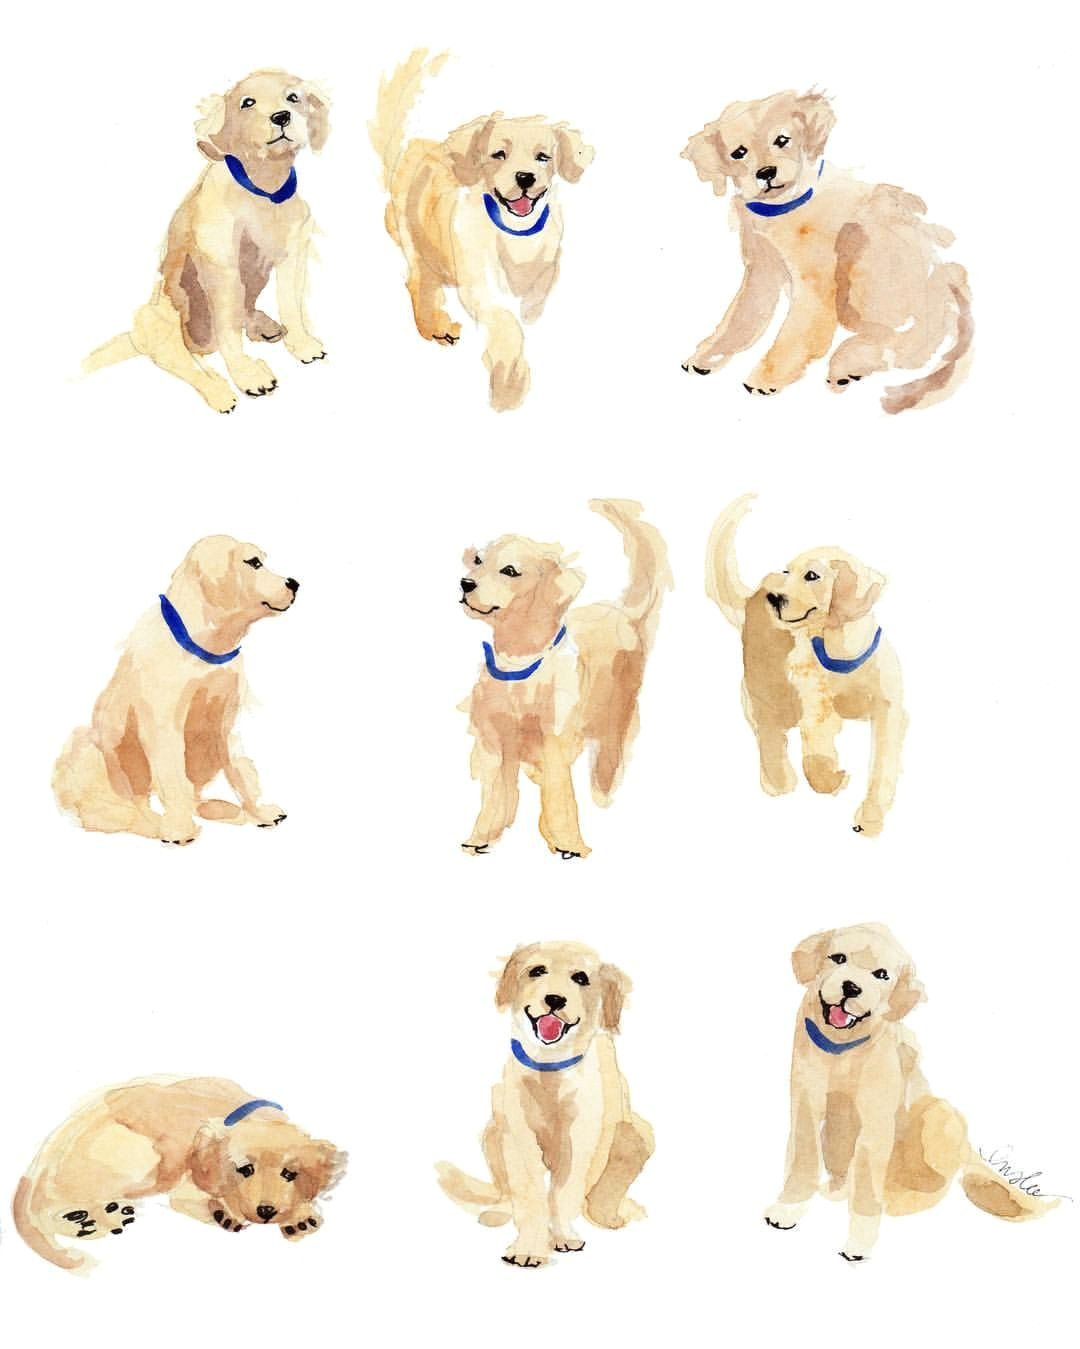 Drawing Pictures Of Cute Dogs Puppies Inslee Haynes Animal Character Design Pinterest Art